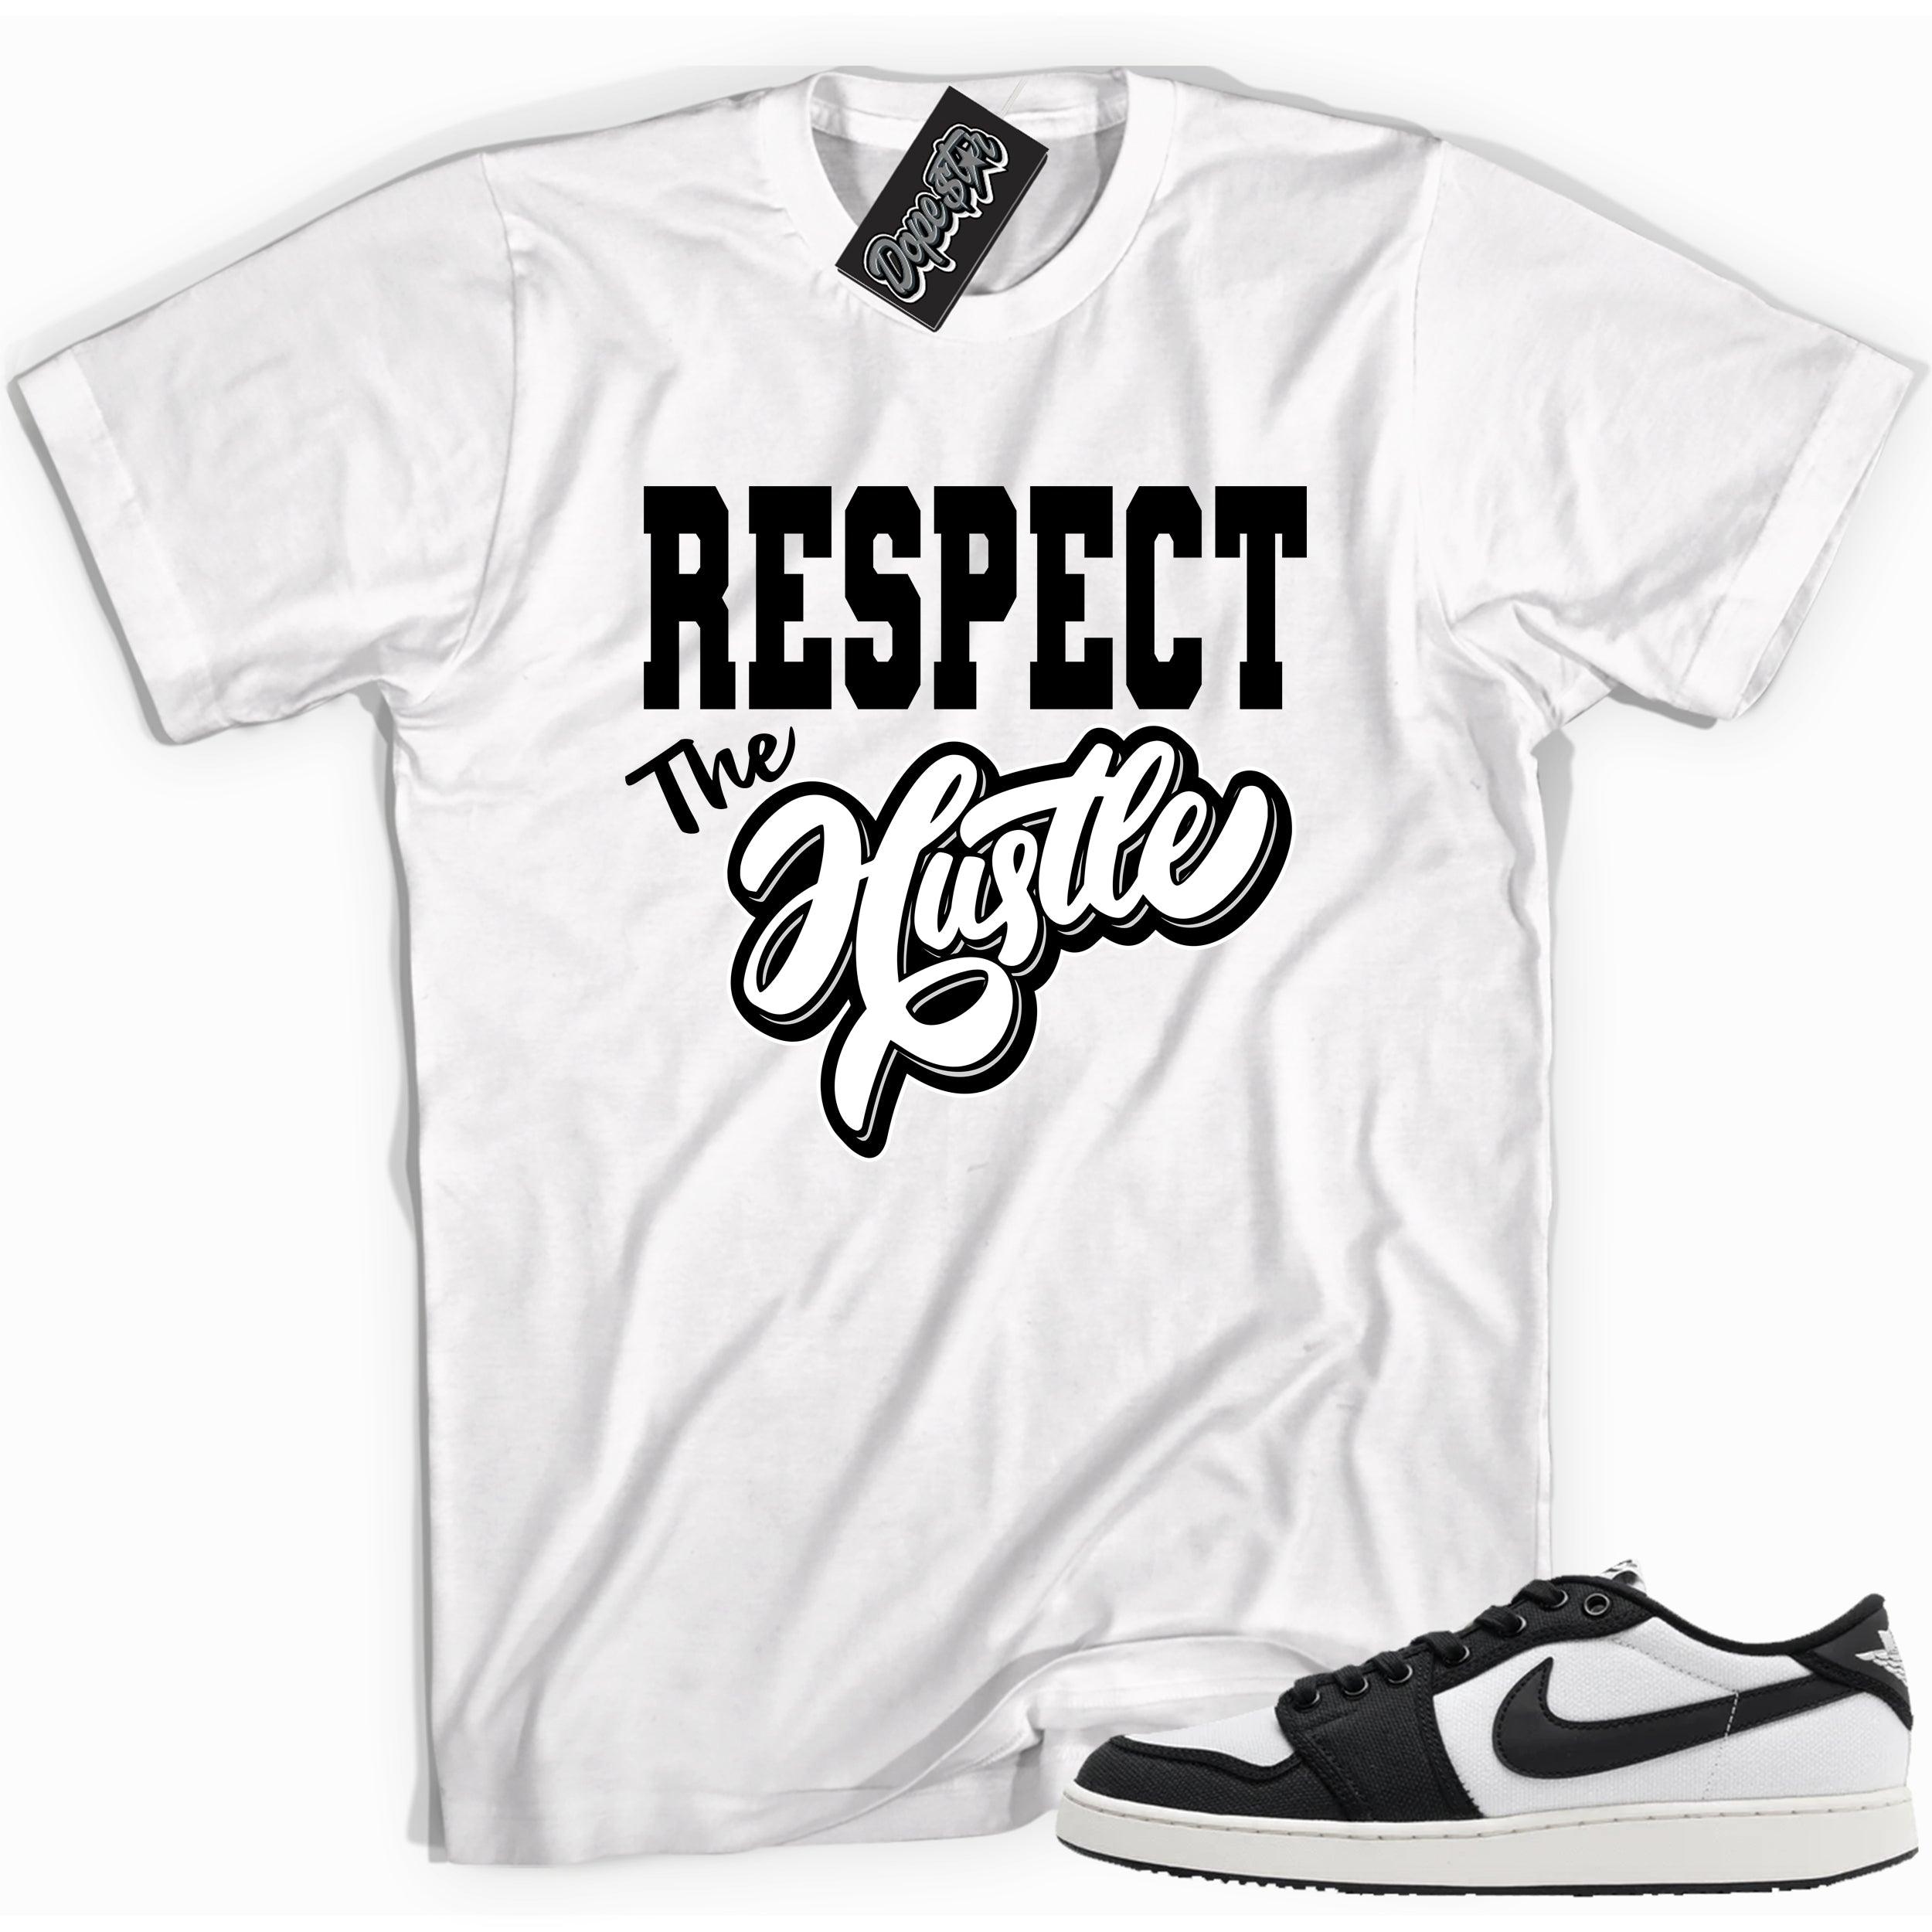 Cool white graphic tee with 'respect the hustle' print, that perfectly matches Air Jordan 1 Retro Ajko Low Black & White sneakers.